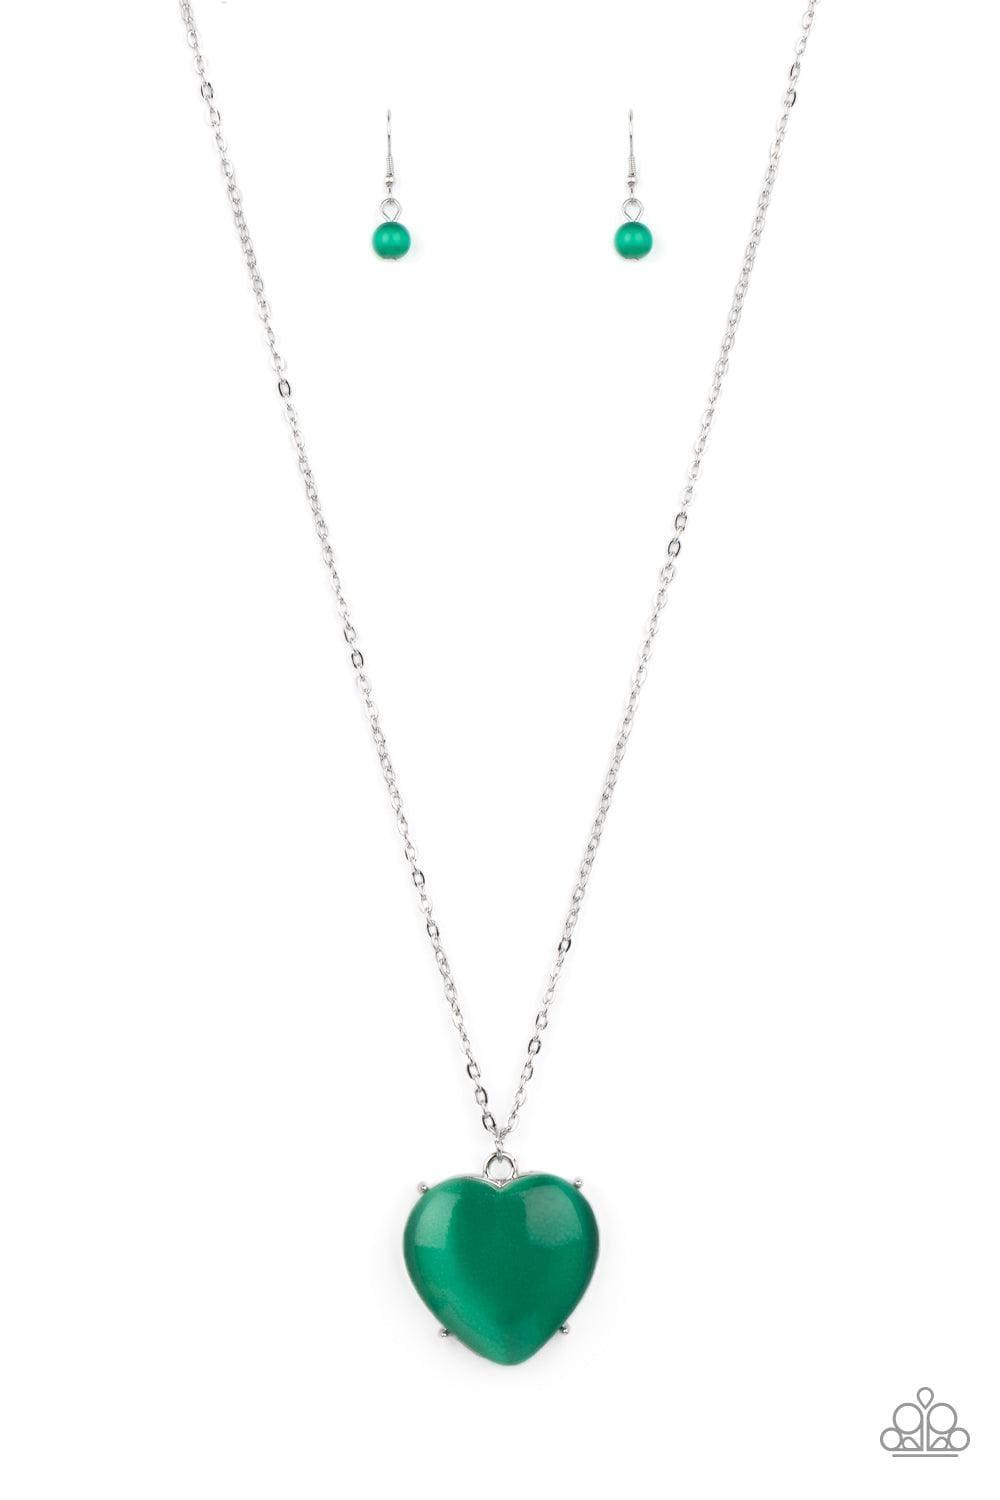 Paparazzi Accessories - Warmhearted Glow - Green Necklace - Bling by JessieK